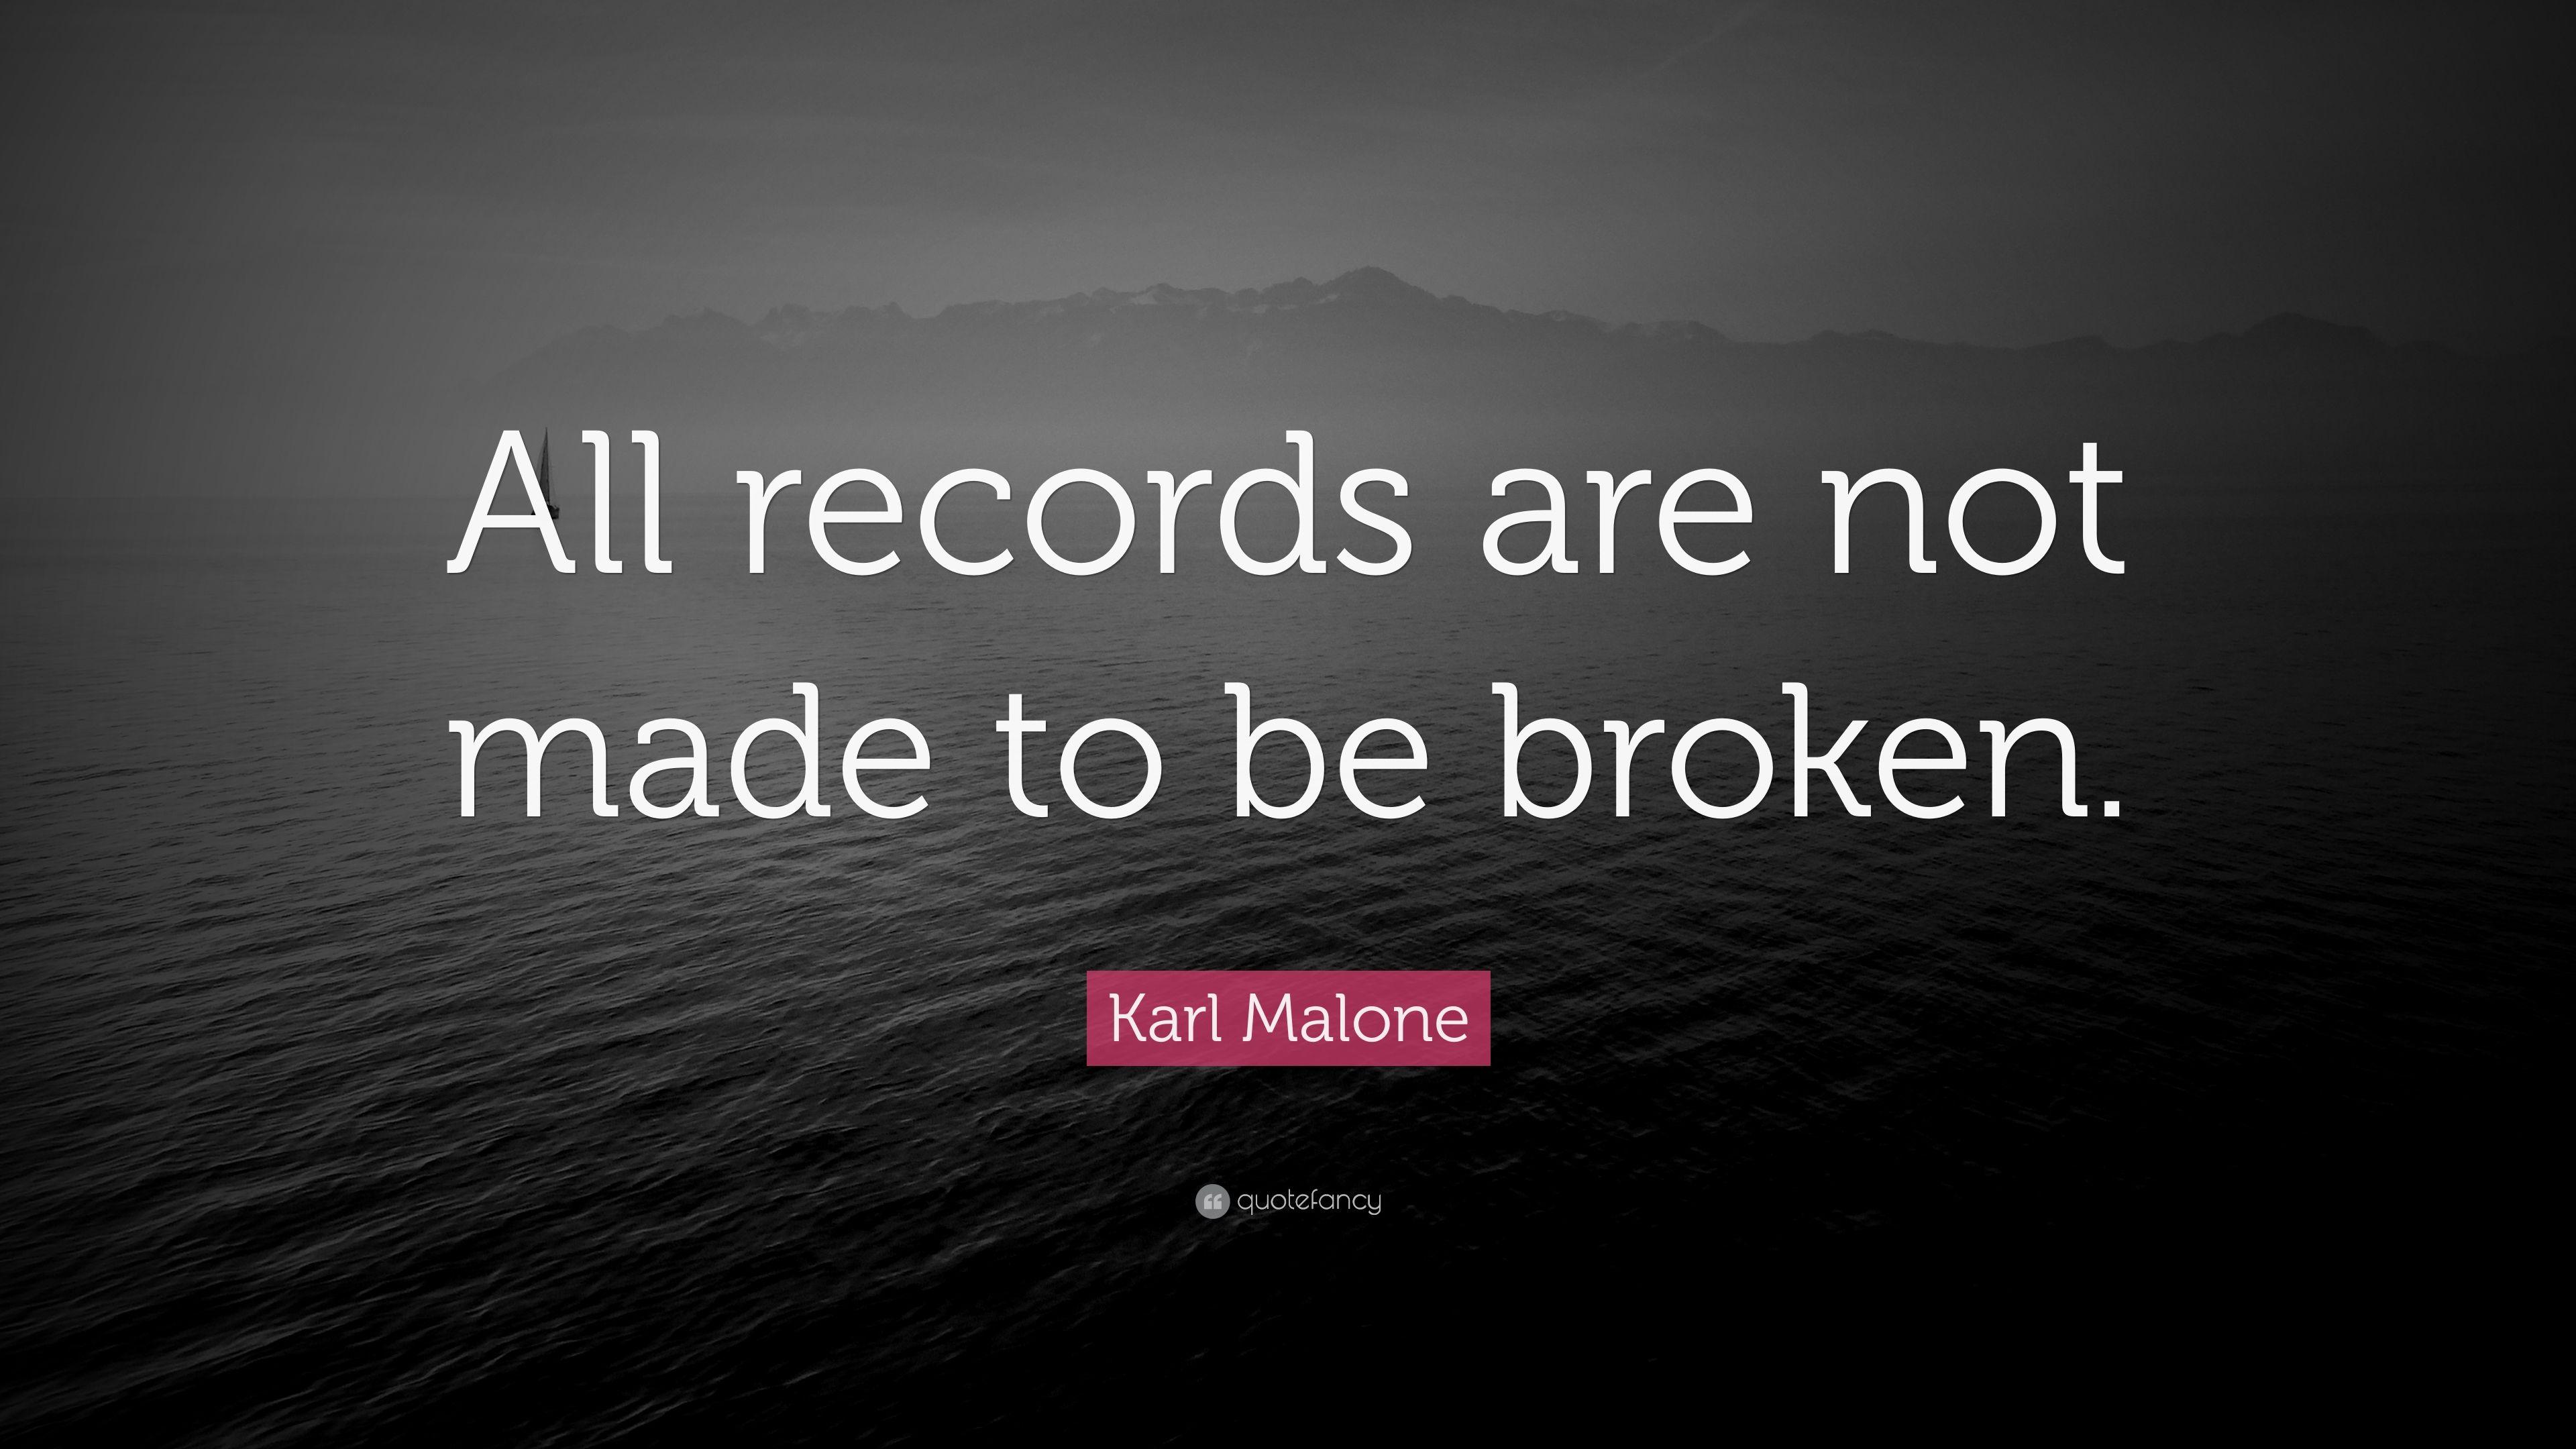 Karl Malone Quote: “All records are not made to be broken.” 7